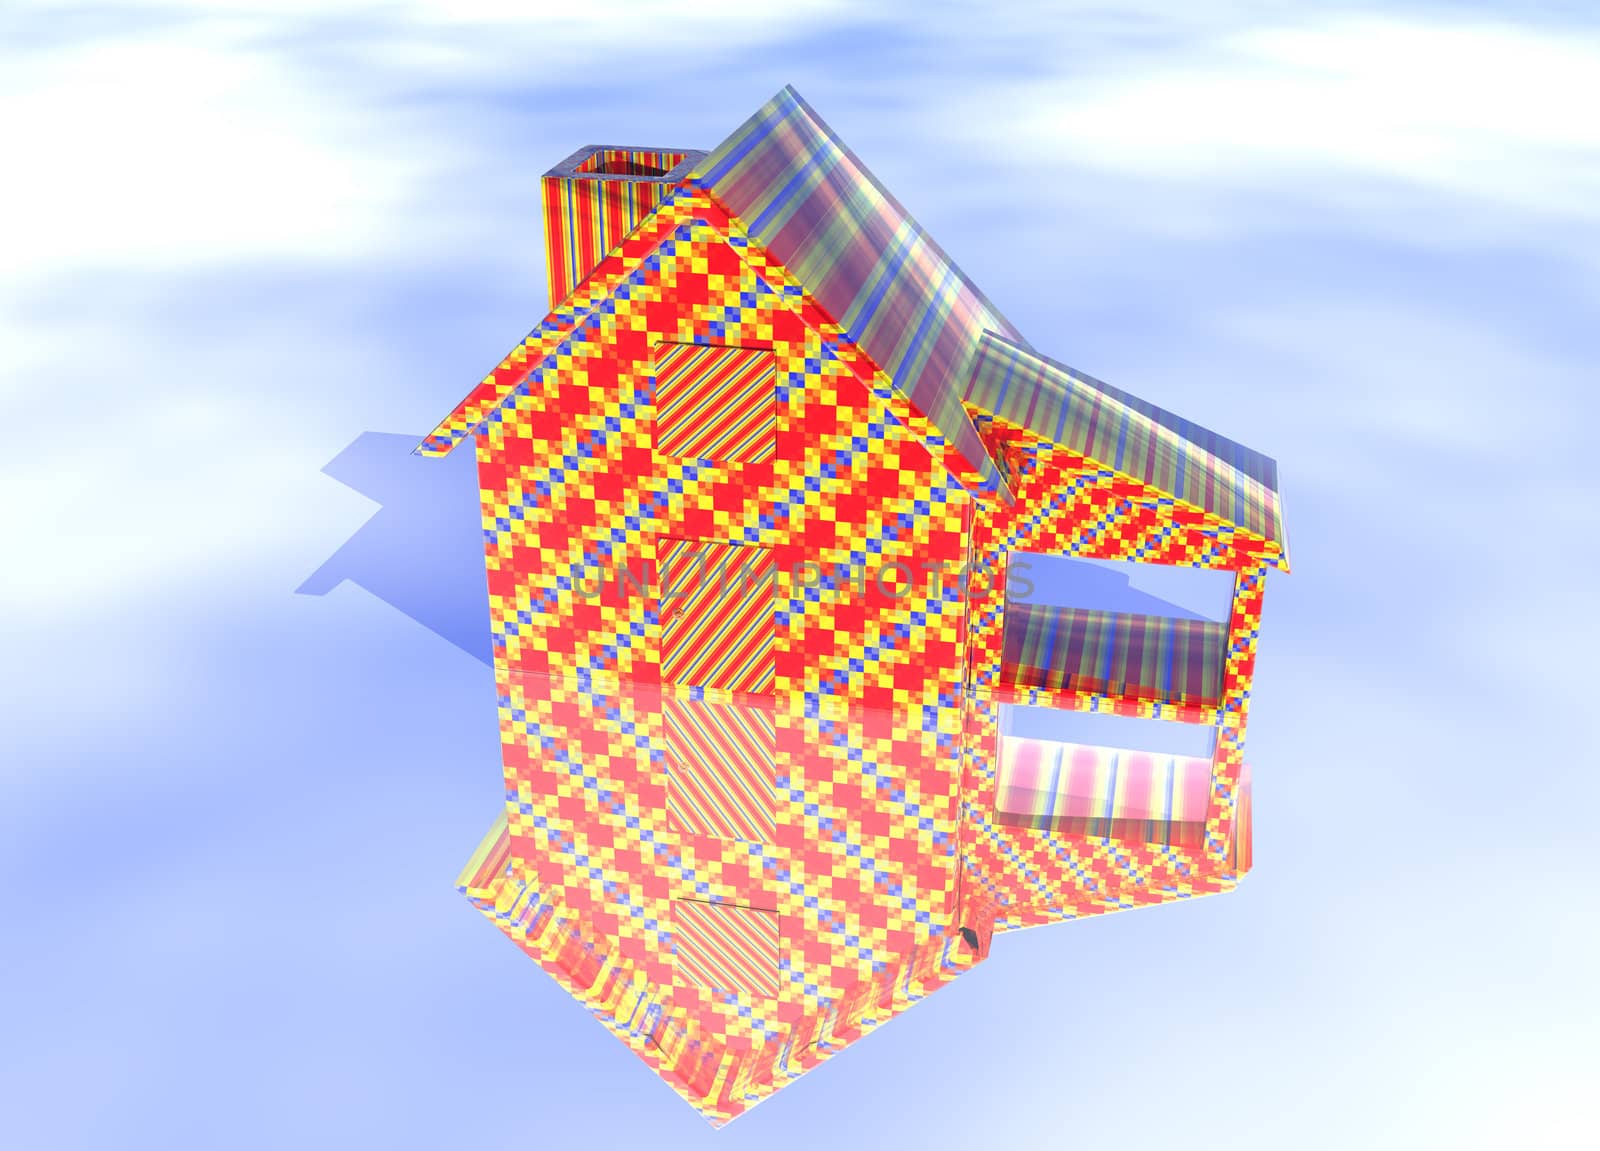 Abstract Christmas Gift Wrapped House by bobbigmac